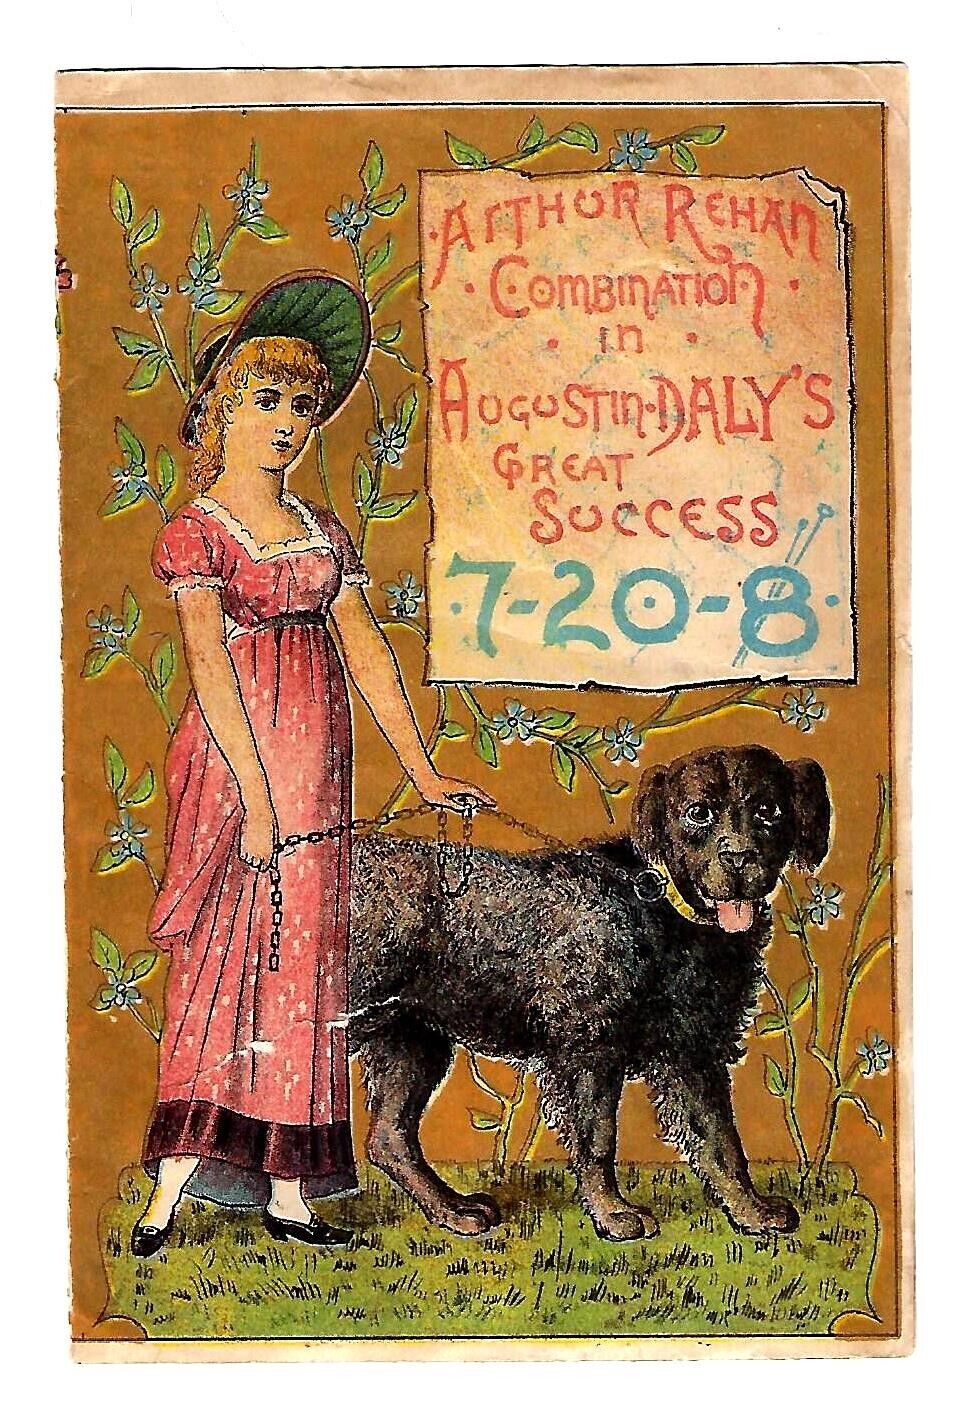 Mid 1800's 7-20-8 Casting The Boomerang Advertising Flyer